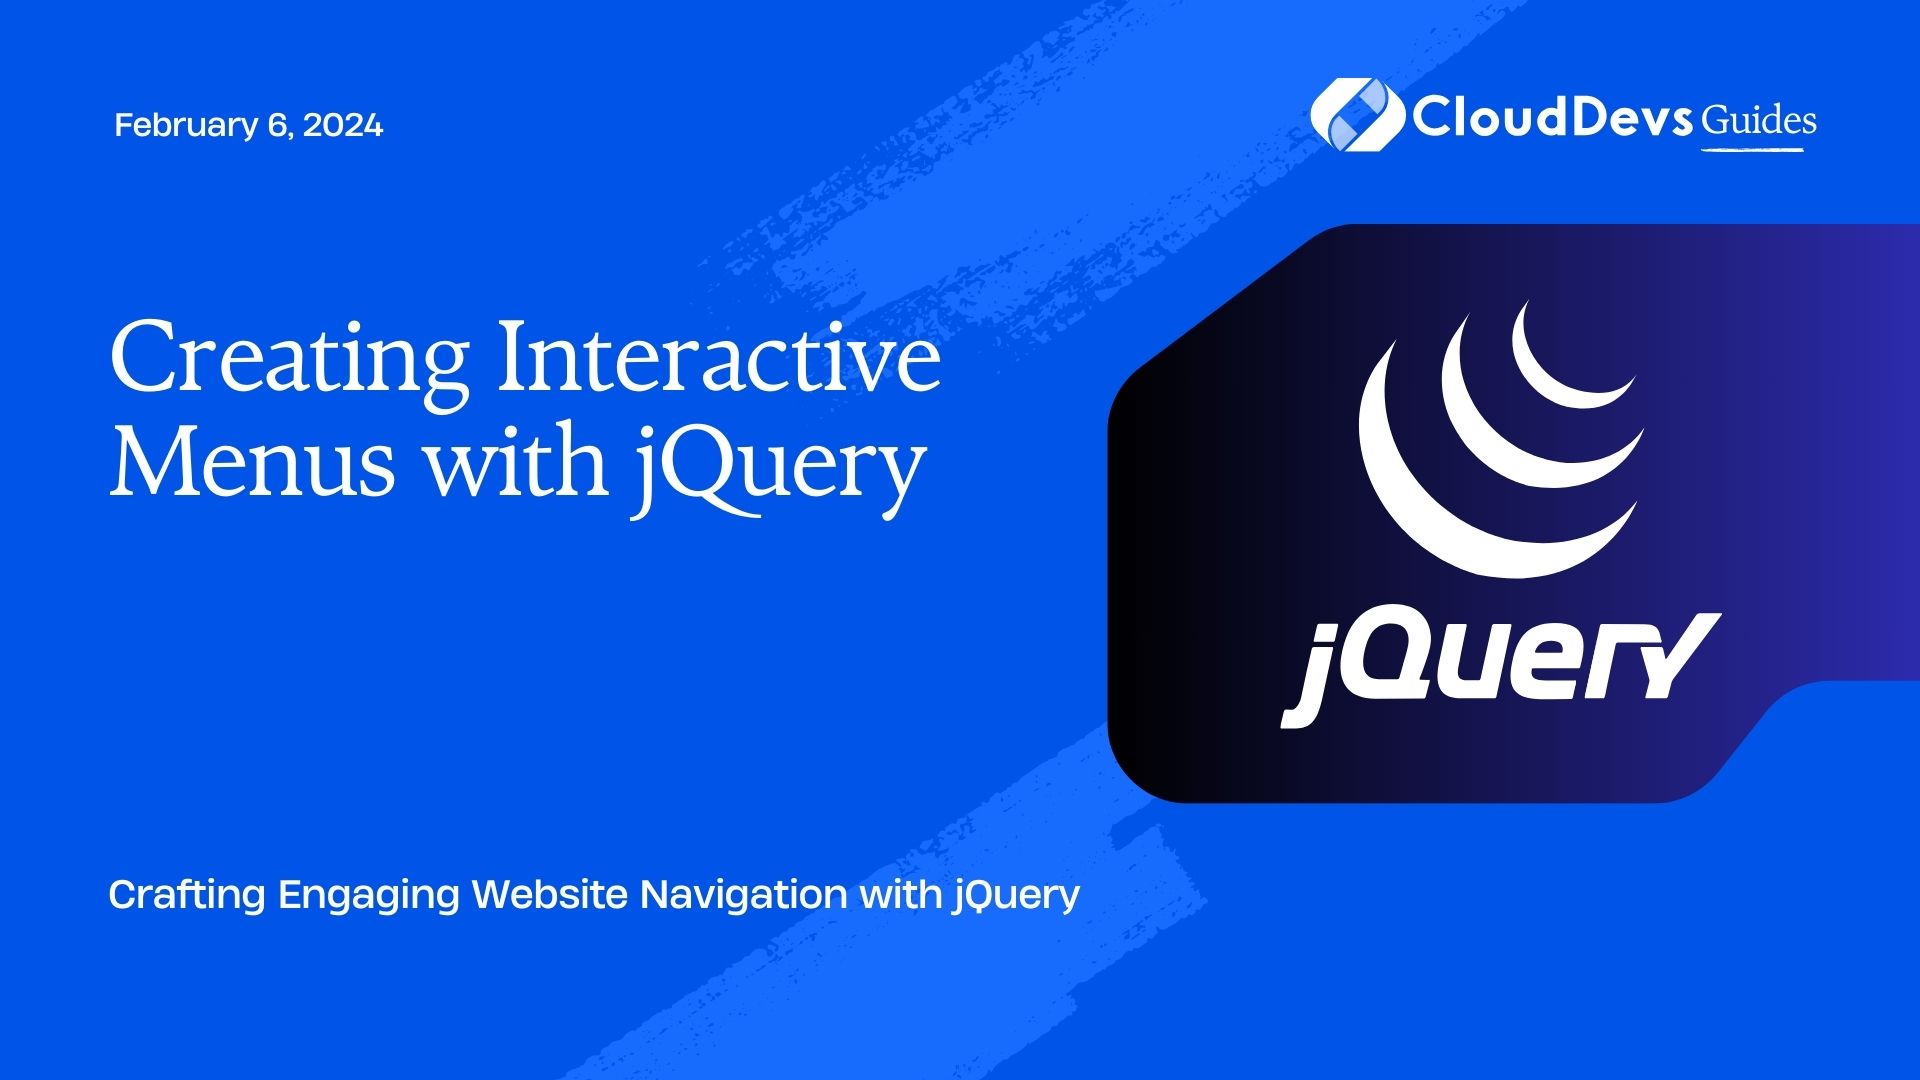 Creating Interactive Menus with jQuery